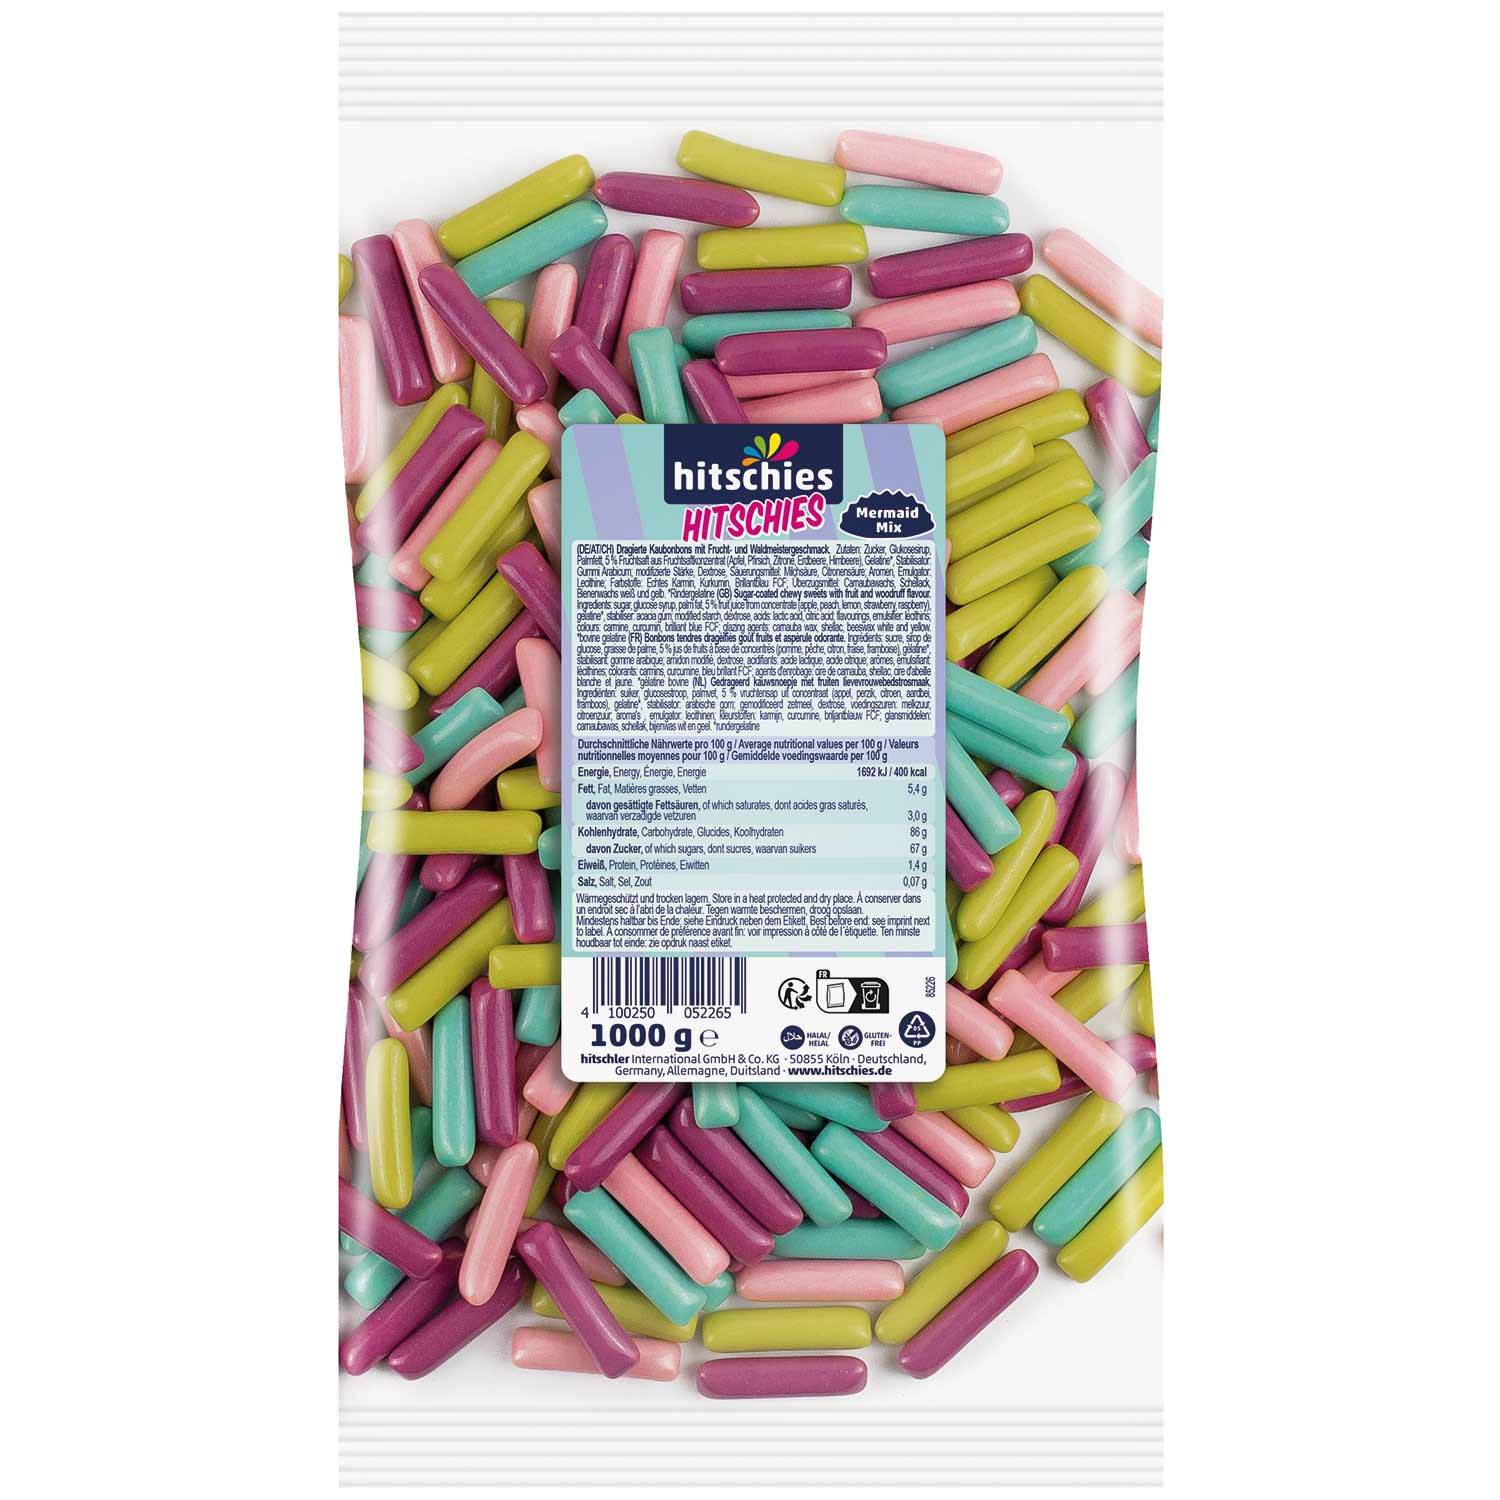 hitschies Chewing Candy Mermaid Mix Limited Edition 1kg / 2.2lbs